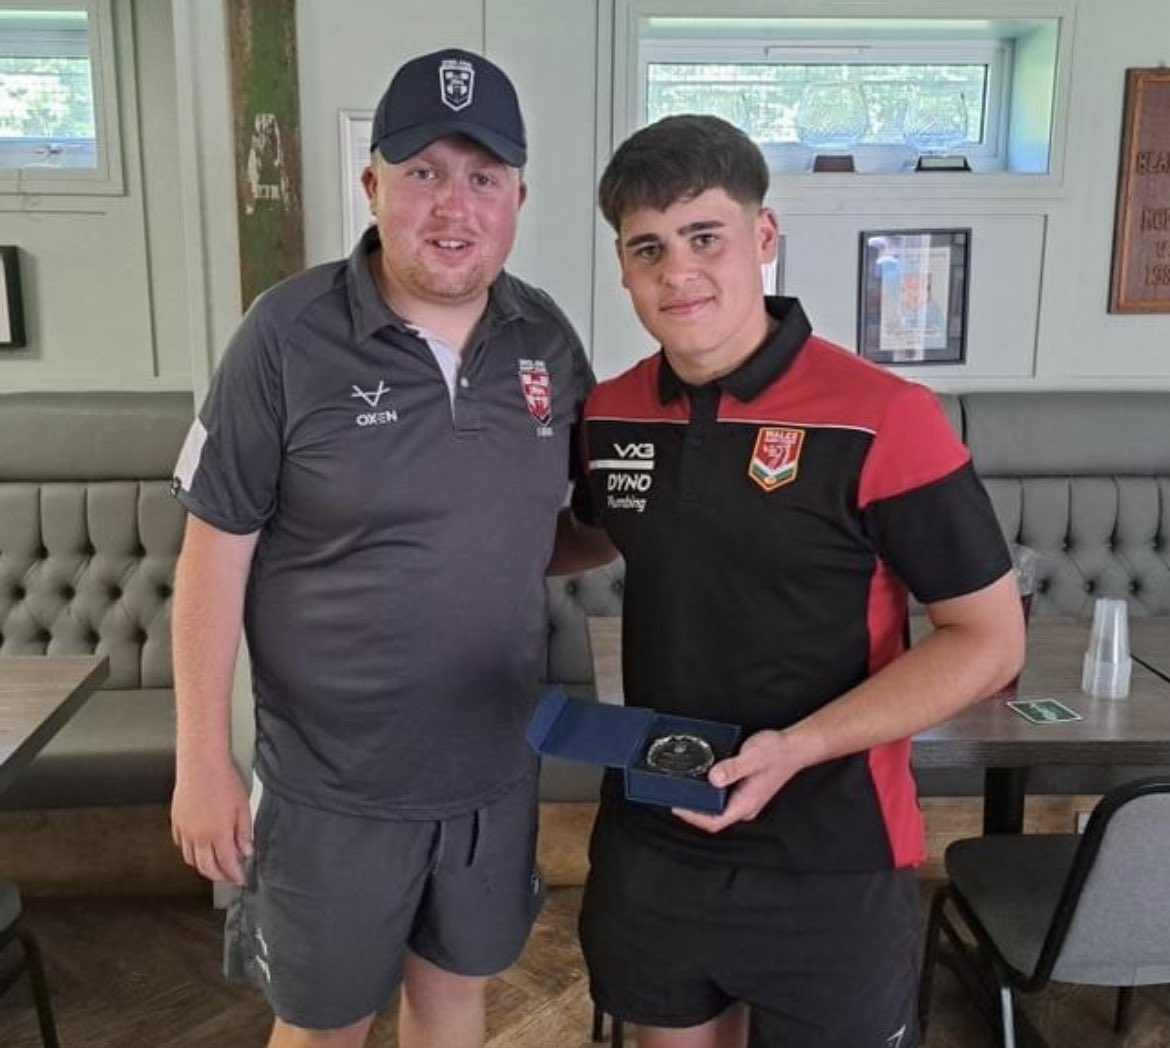 So proud for our very own ETHAN PATERSON who represented Wales Rugby League U16s yesterday. Ethan was named as man of the match by his English counterparts. Such an achievement. Well done Ethan!! 🙌🏻🙌🏻 @IslwynHigh @AberValleyW @Ethan47328340